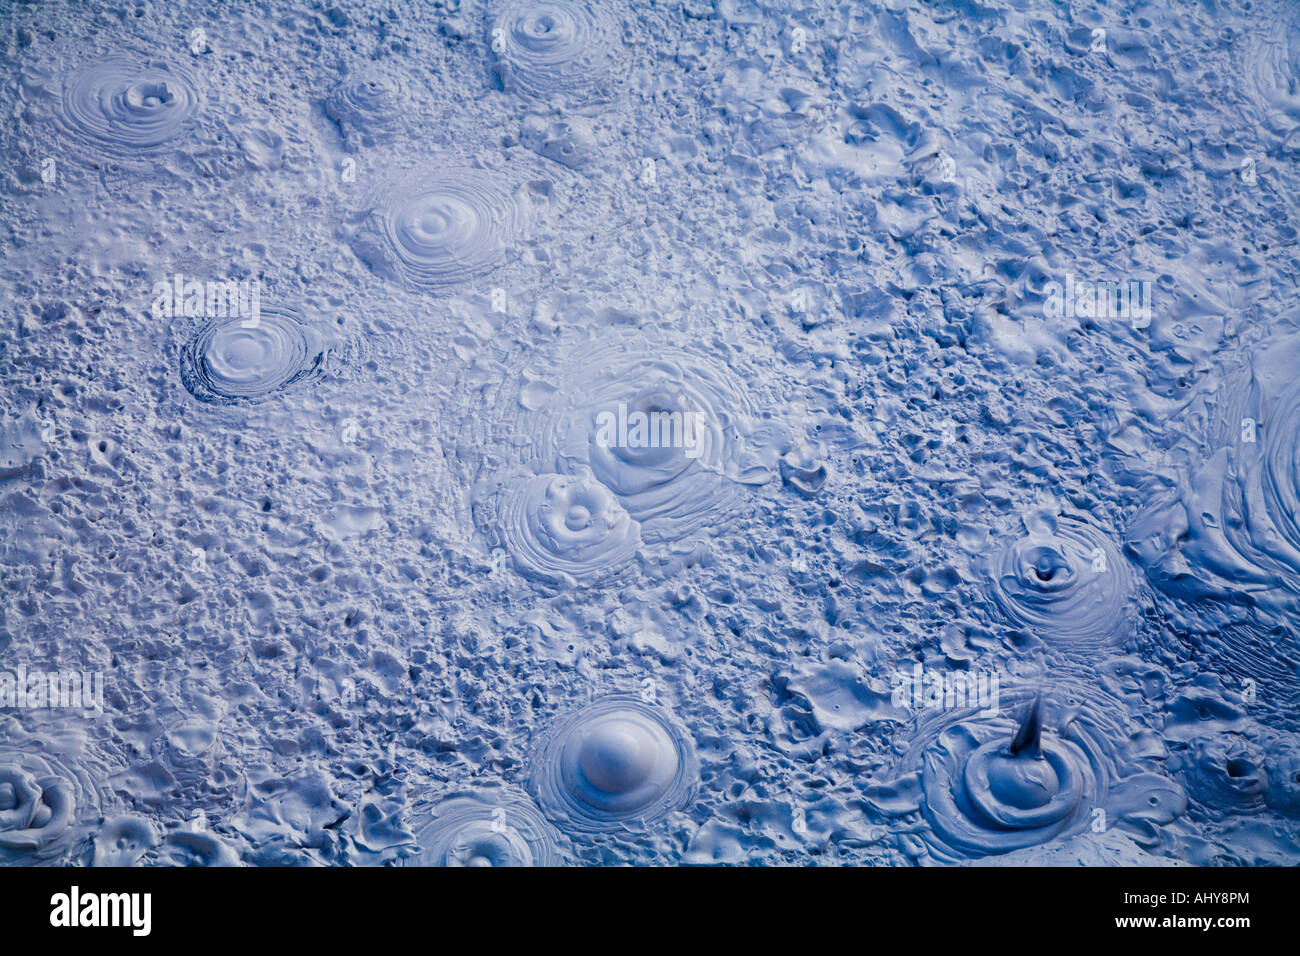 Bubbling mud in a bolivian geyser field Stock Photo